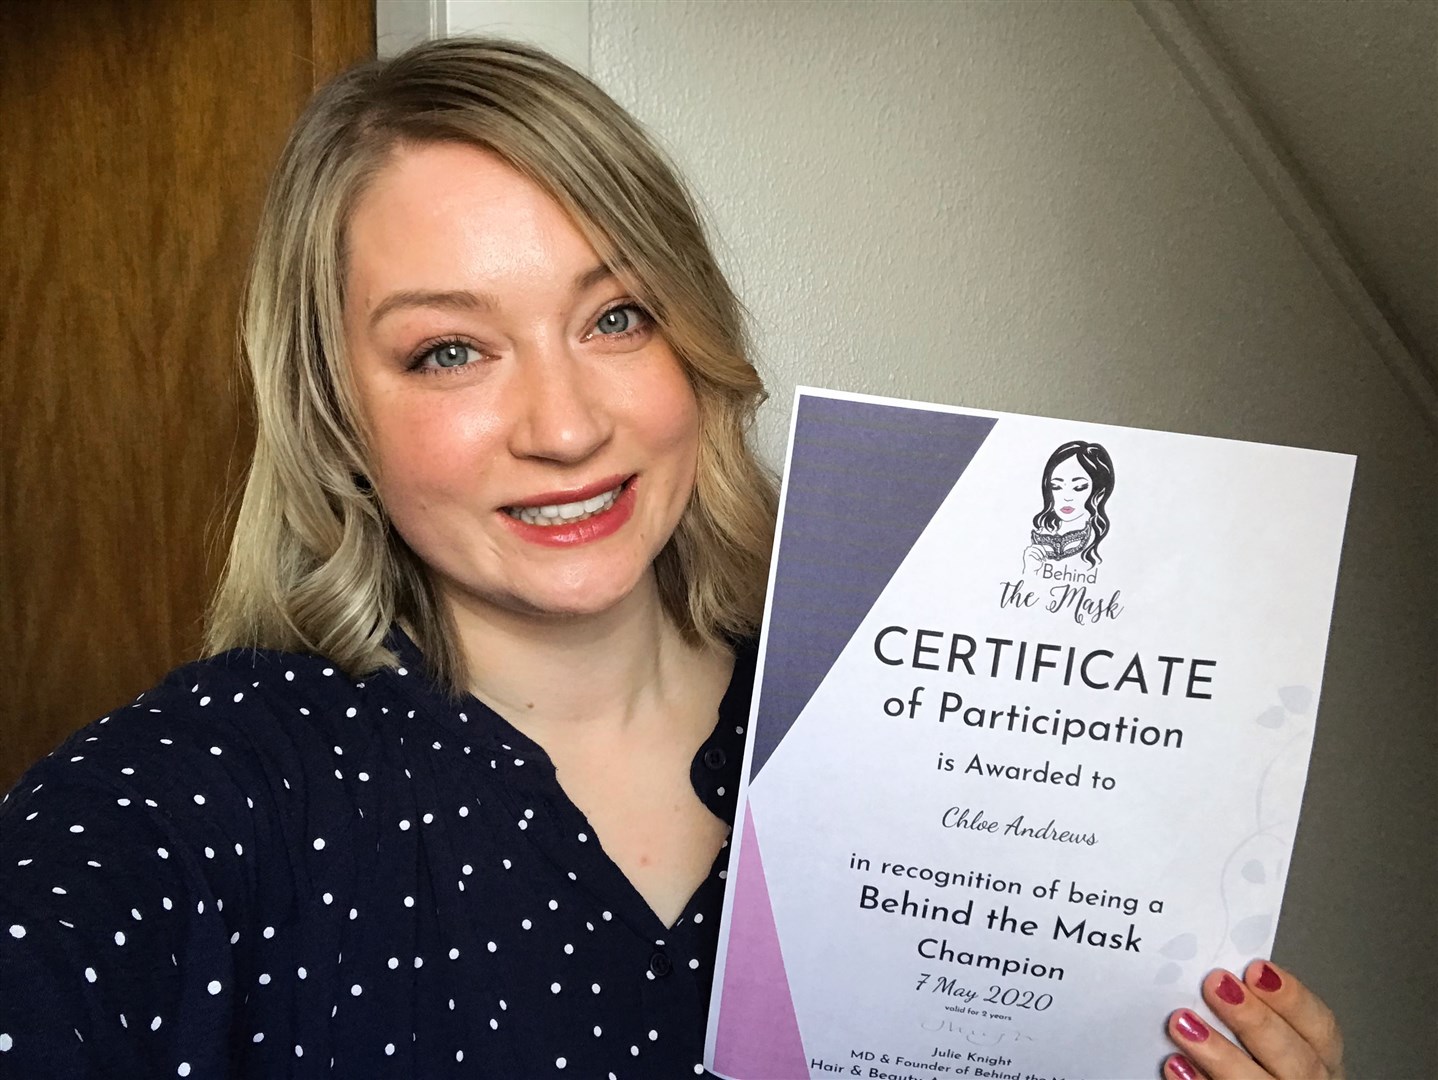 Chloe Andrews, owner of Chloe’s Beauty in Elgin, has become a Behind the Mask champion, which equips those in the beauty industry to help people experiencing domestic abuse.